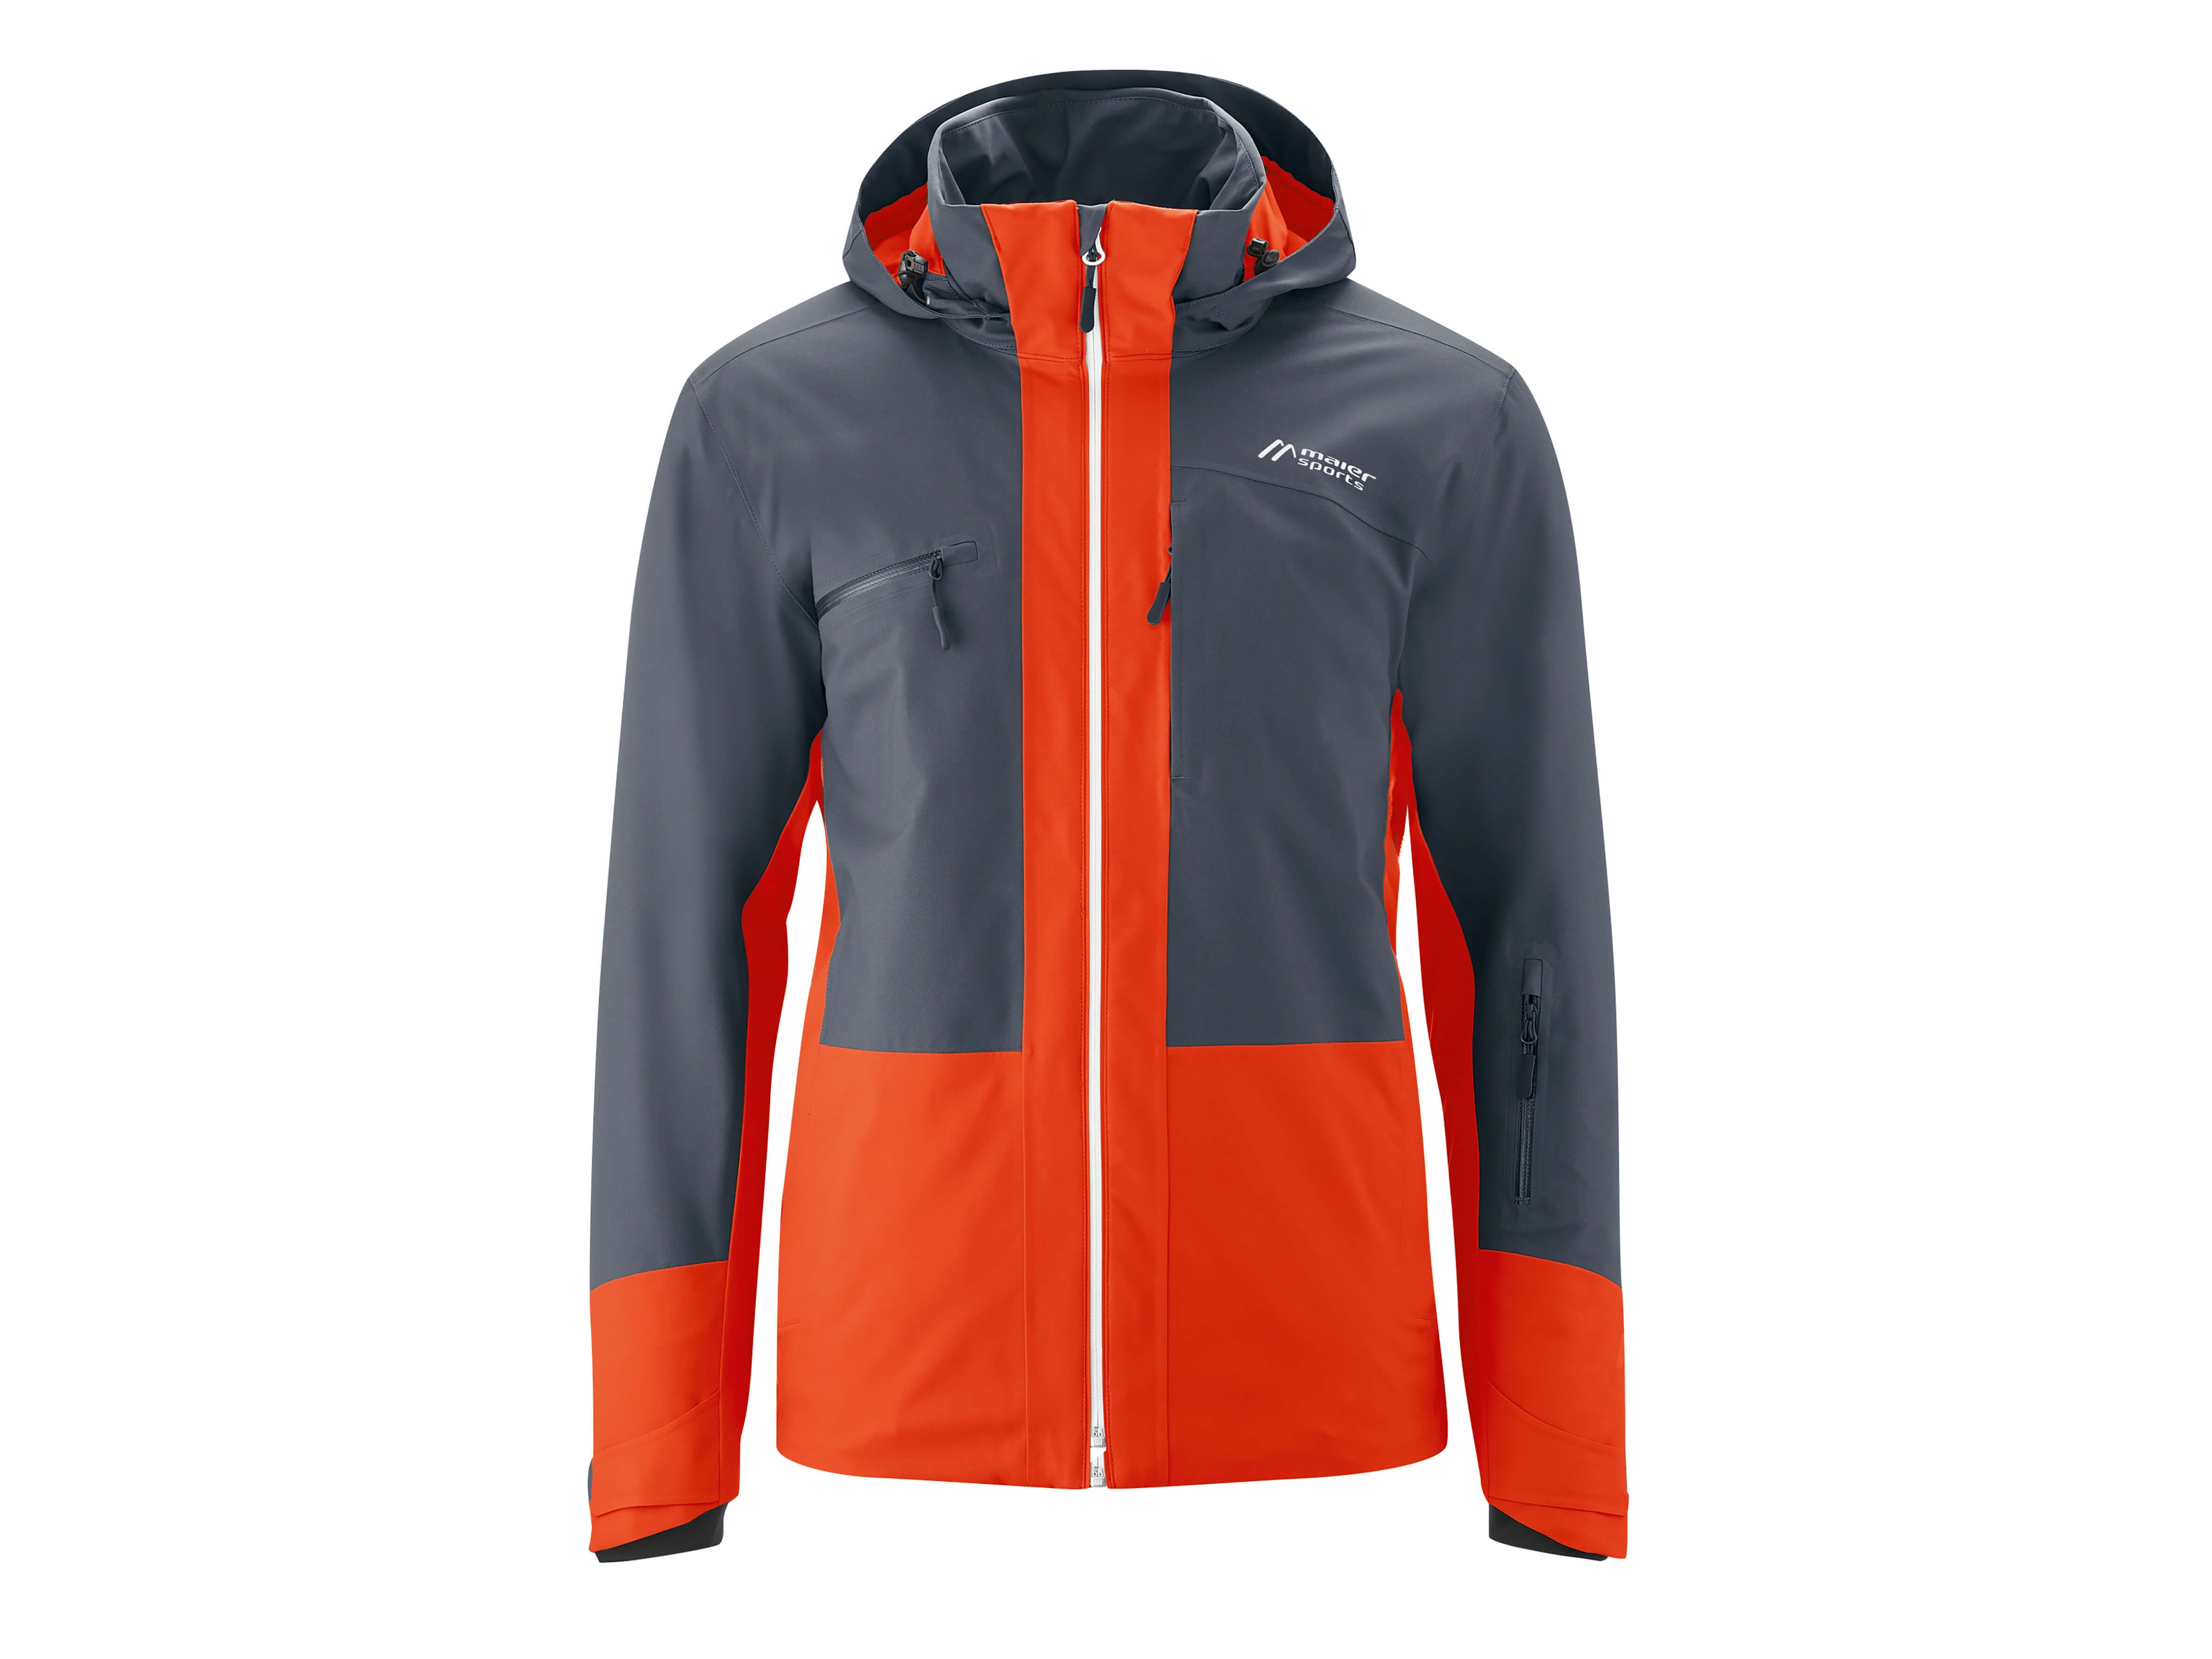 Best men's ski jackets 2021: Helly Hansen, The North Face and more 